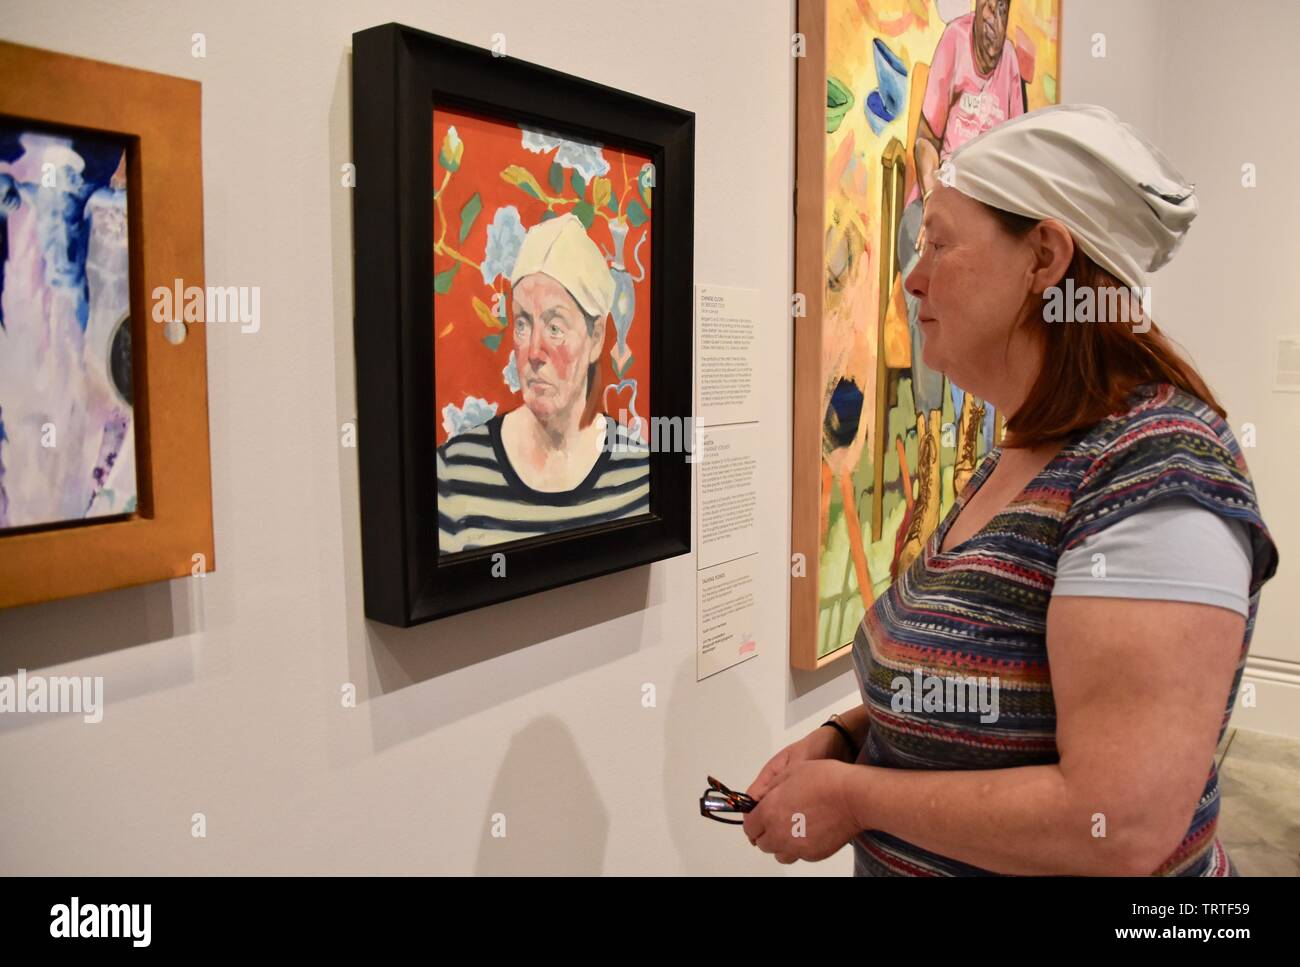 London, UK. Chinese Cloth by Bridget Cox. Model Hilary Lintow. BP Portrait Award 2019 Press View, The Exhibition runs from 13 June to 20 October 2019. National Portrait Gallery, St Martin's Place, London. UK Credit: michael melia/Alamy Live News Stock Photo